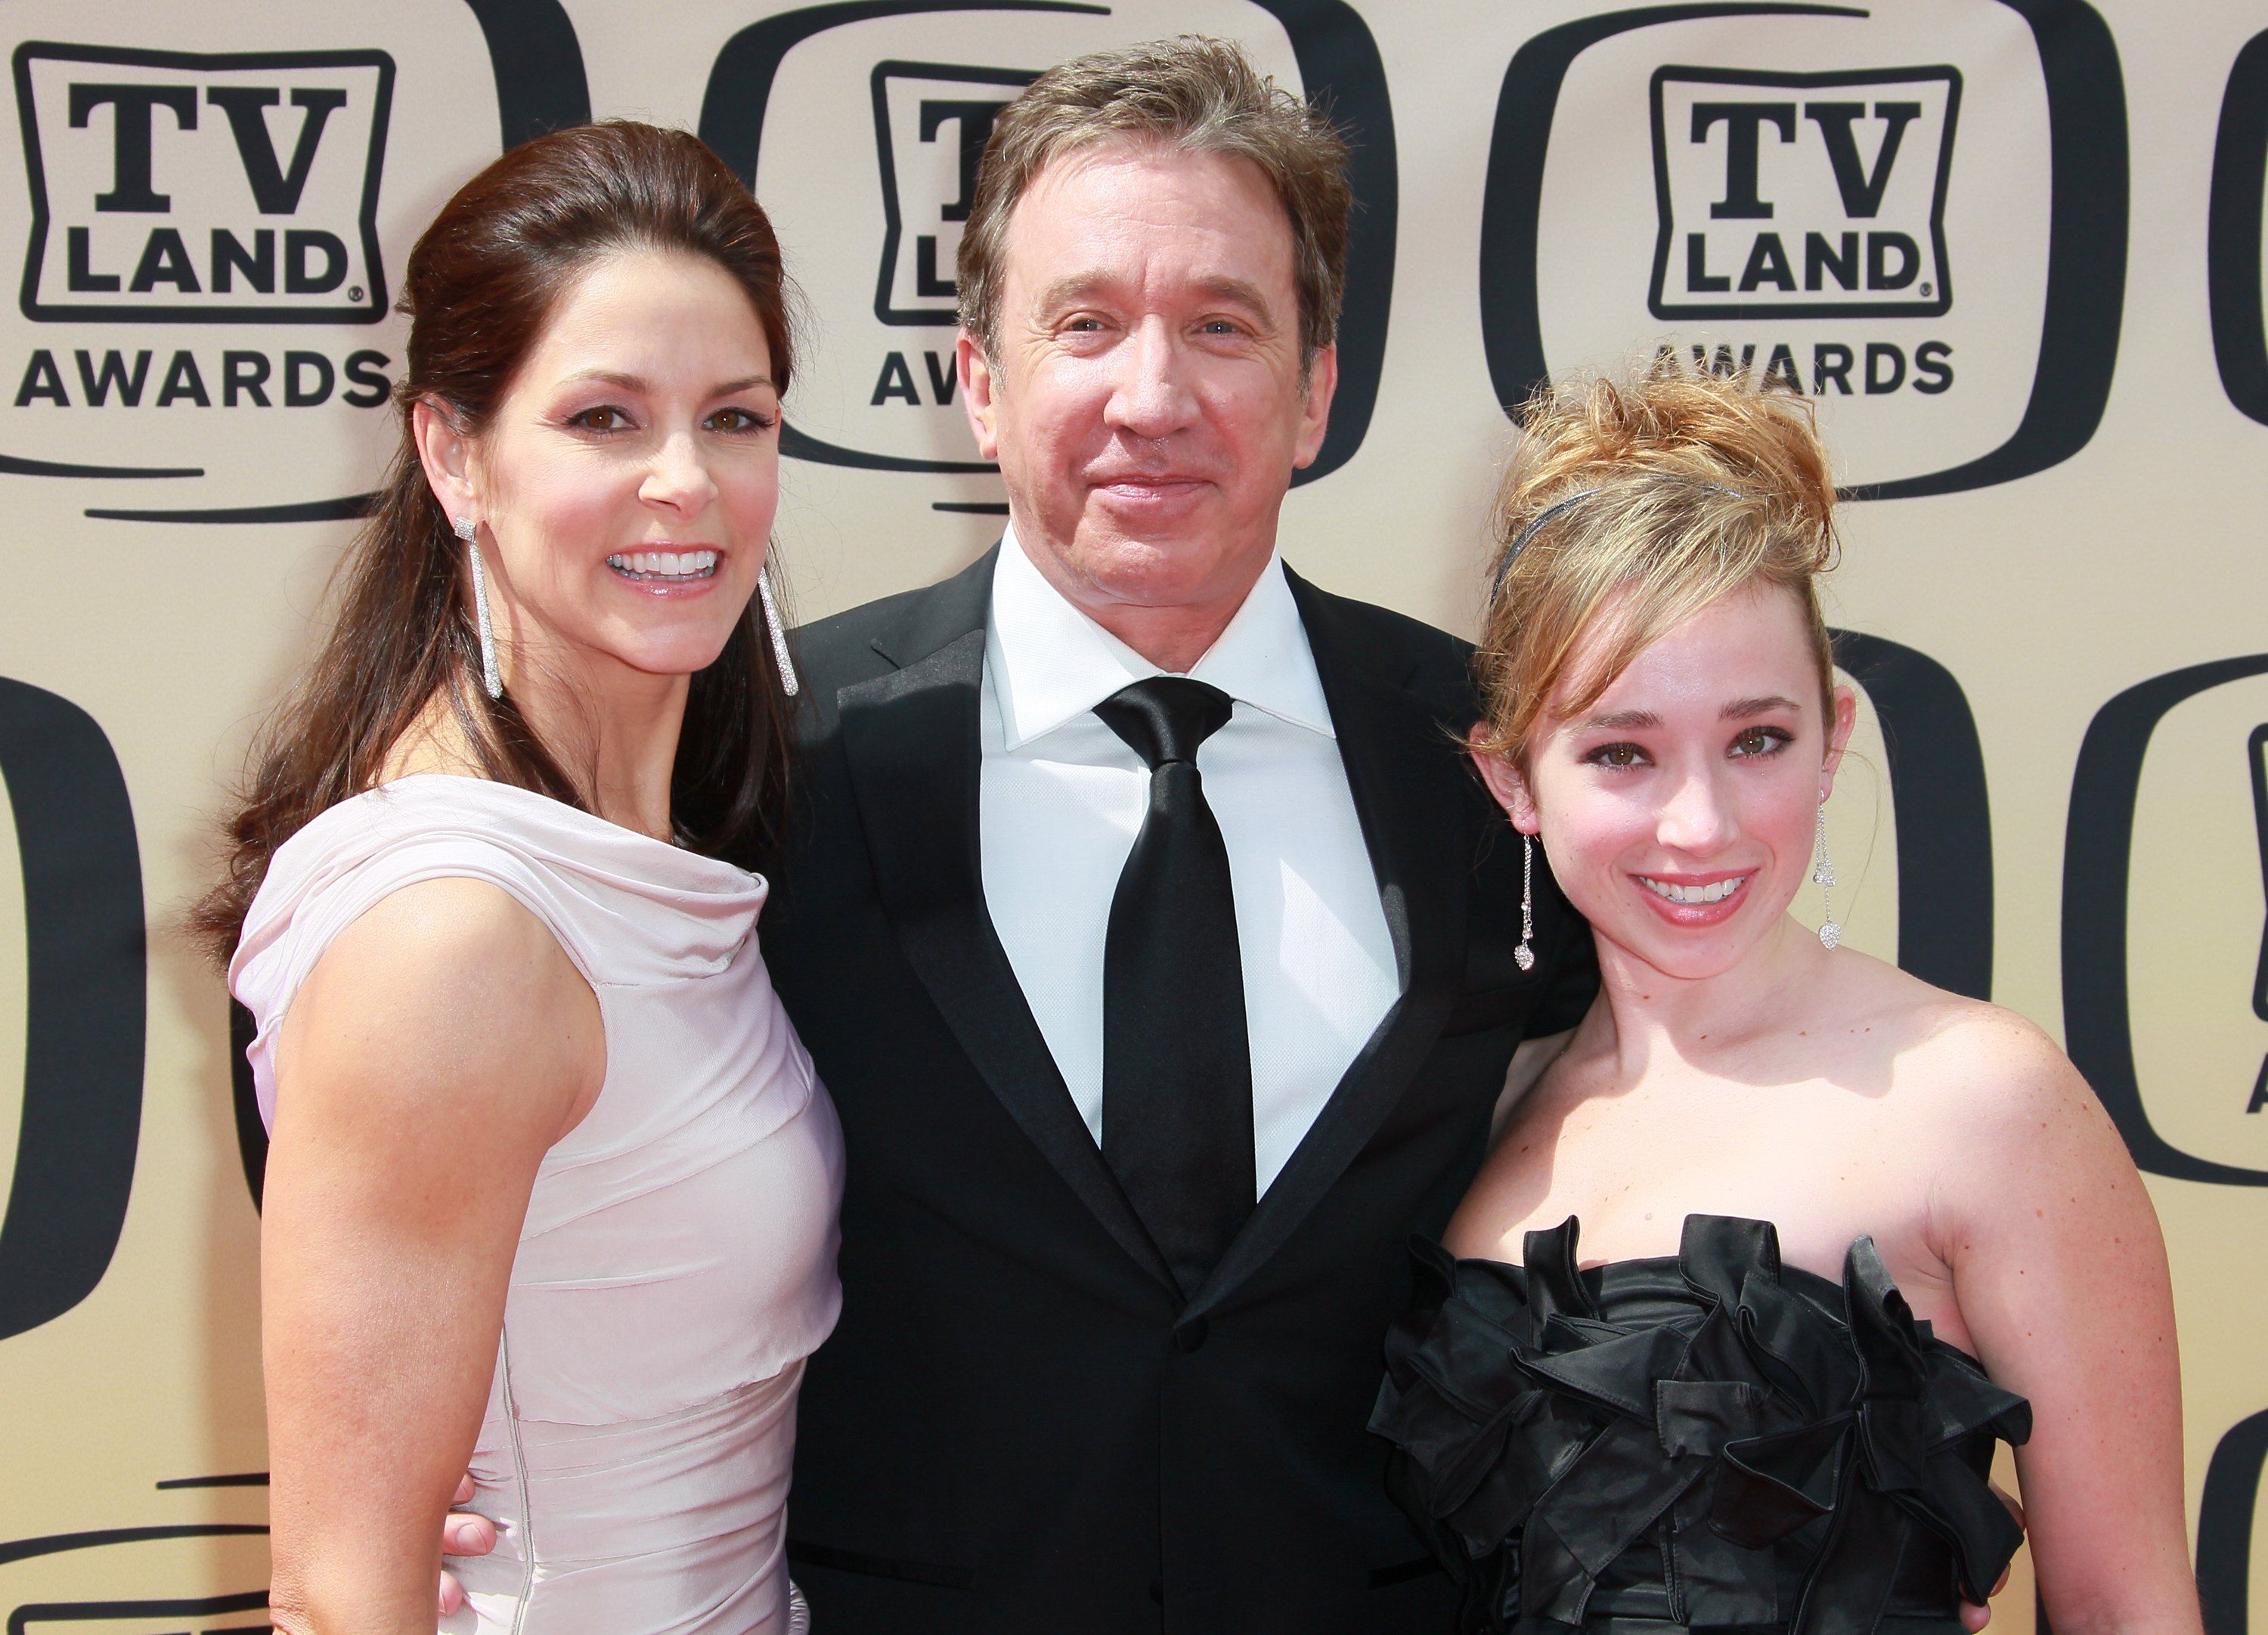 Jane Hajduk, Tim Allen, and Katherine Allen during the 8th Annual TV Land Awards at Sony Studios on April 17, 2010 in Culver City, California. | Source: Getty Images